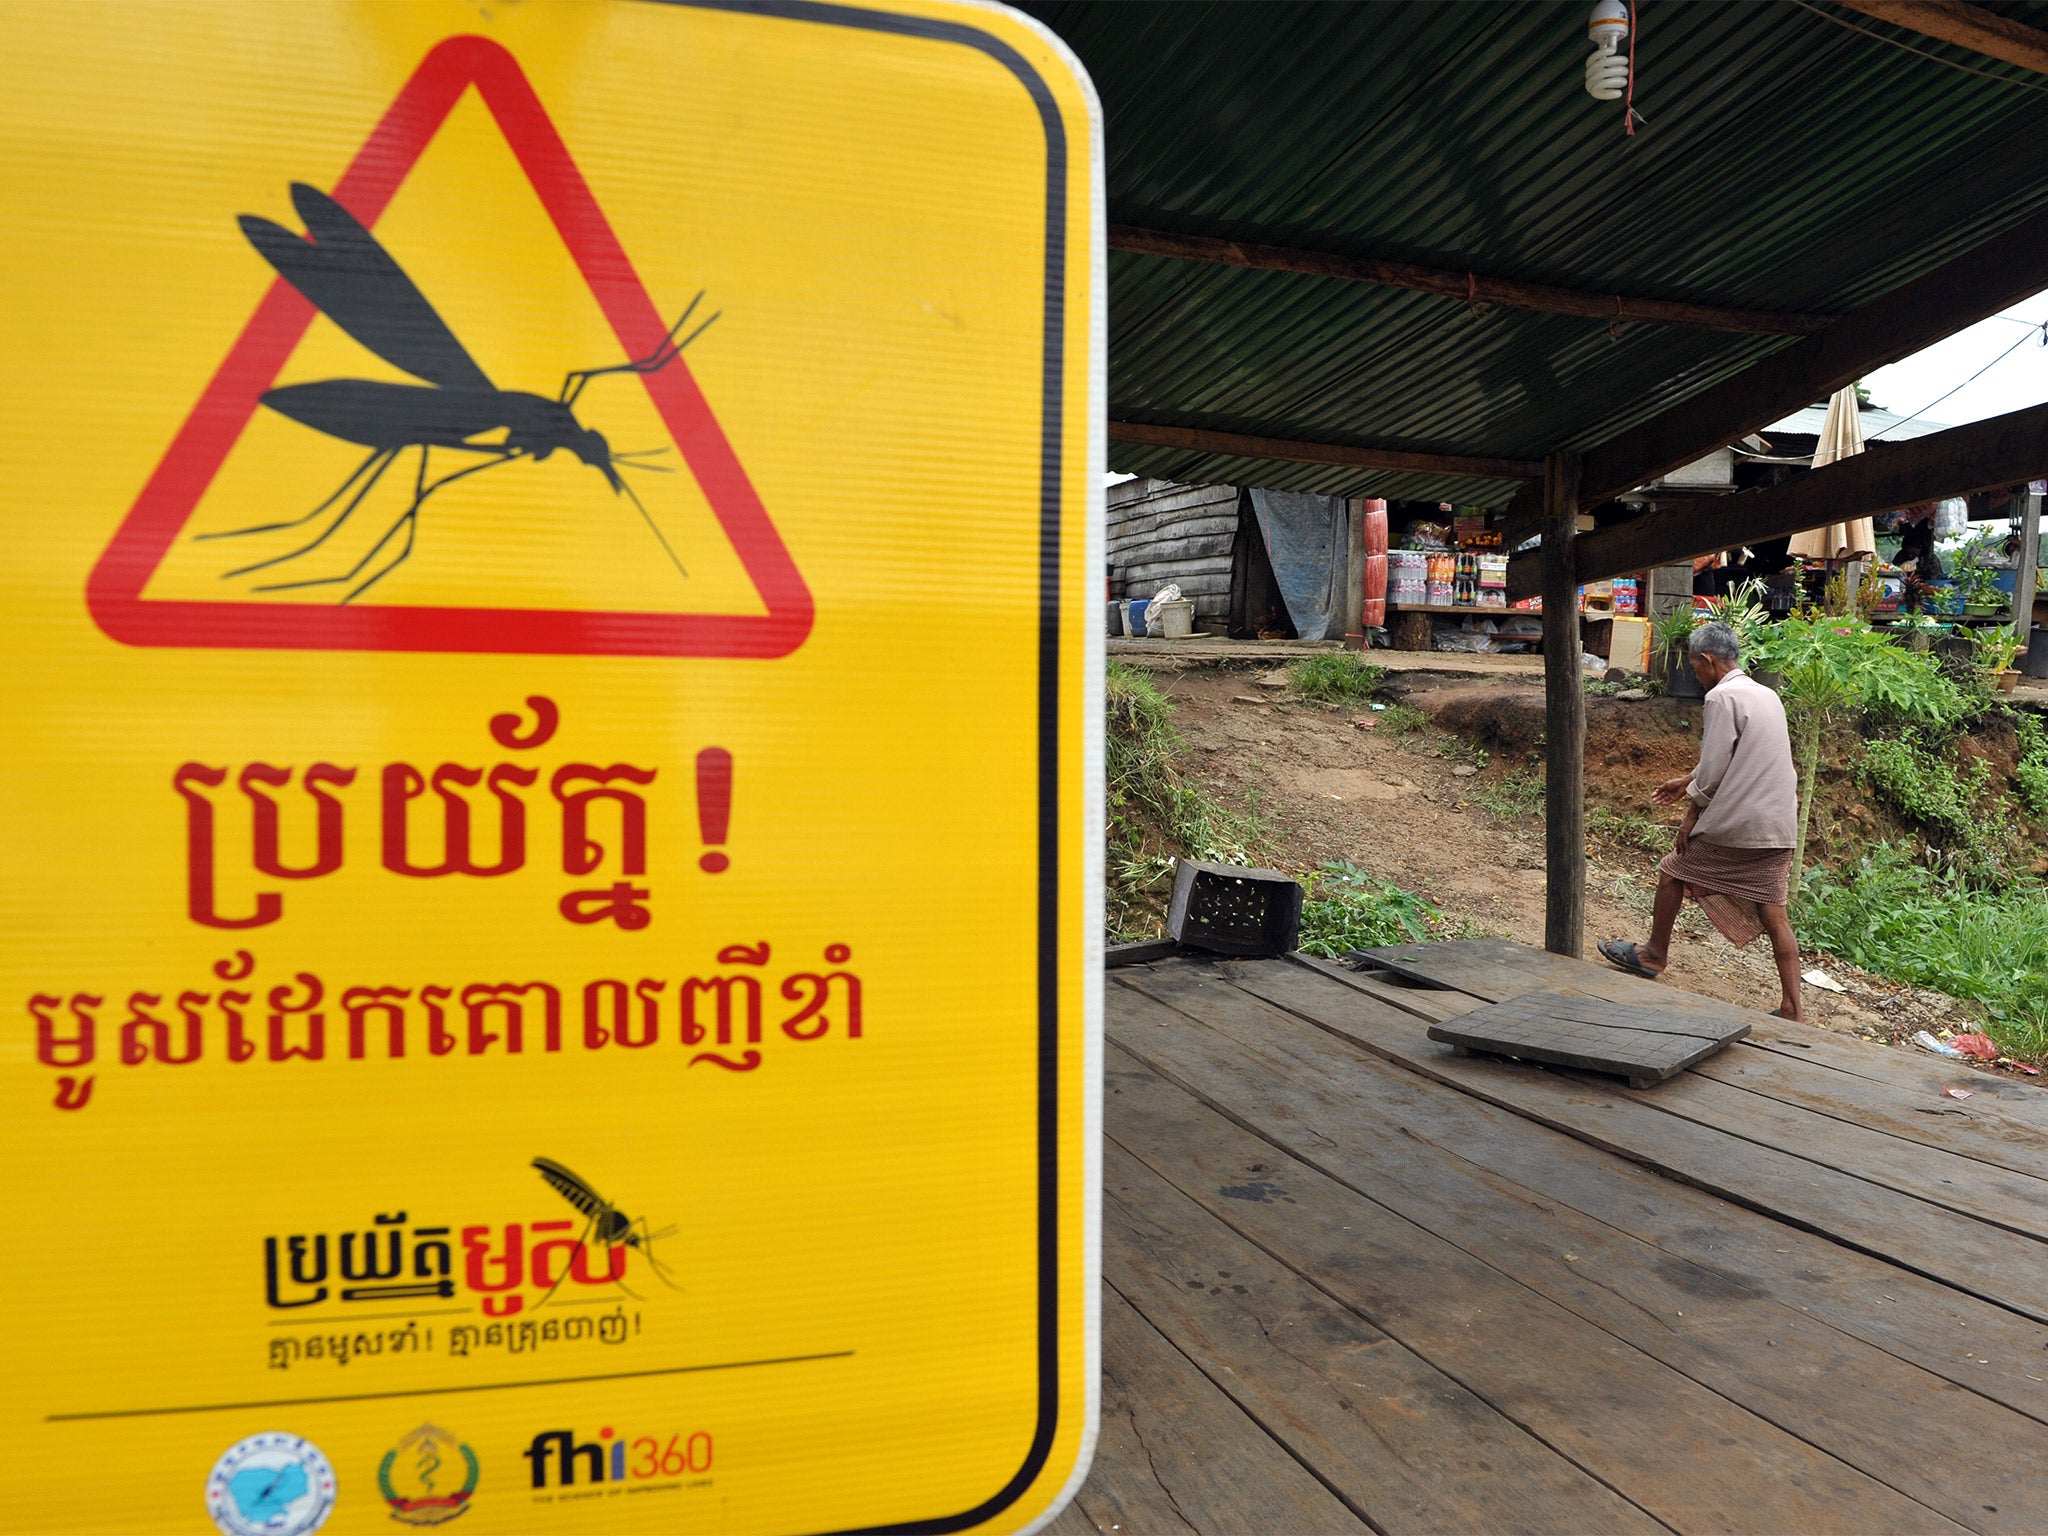 A mosquito warning sign at a village in Cambodia